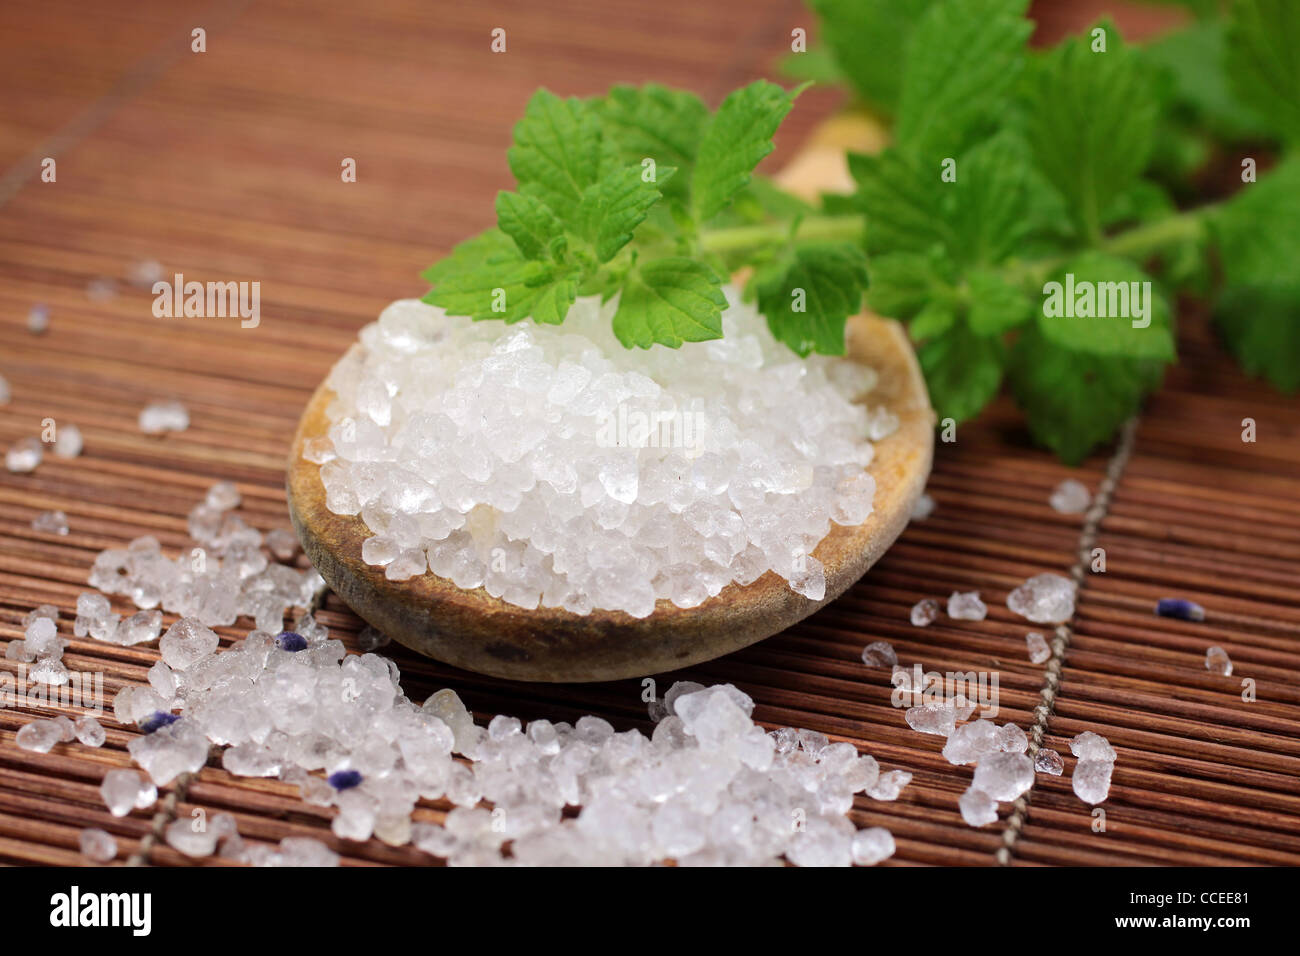 wooden spoon with bath salt and herbs Stock Photo